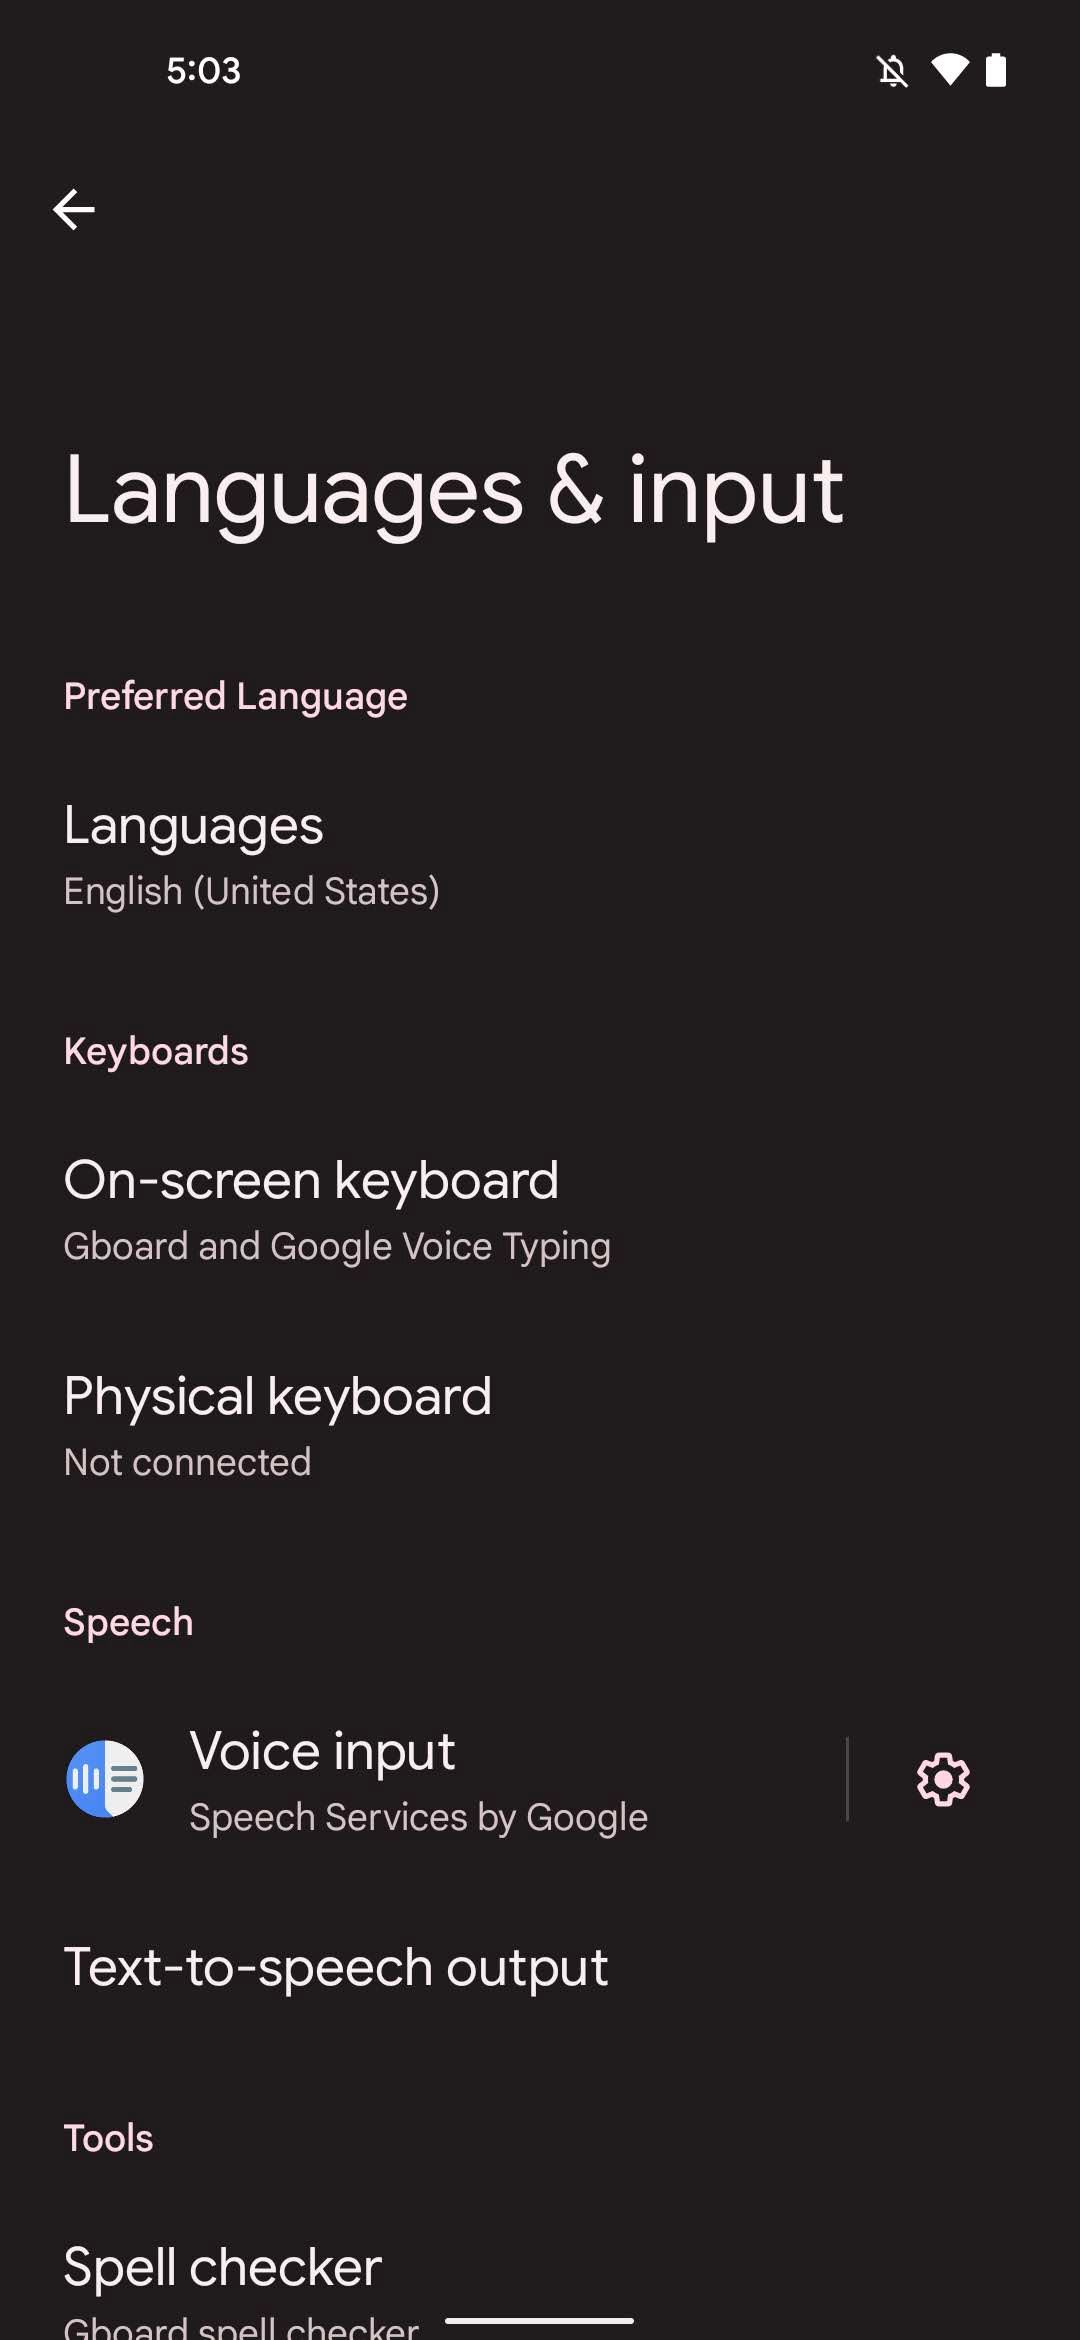 Android's Languages and input settings without App Languages section